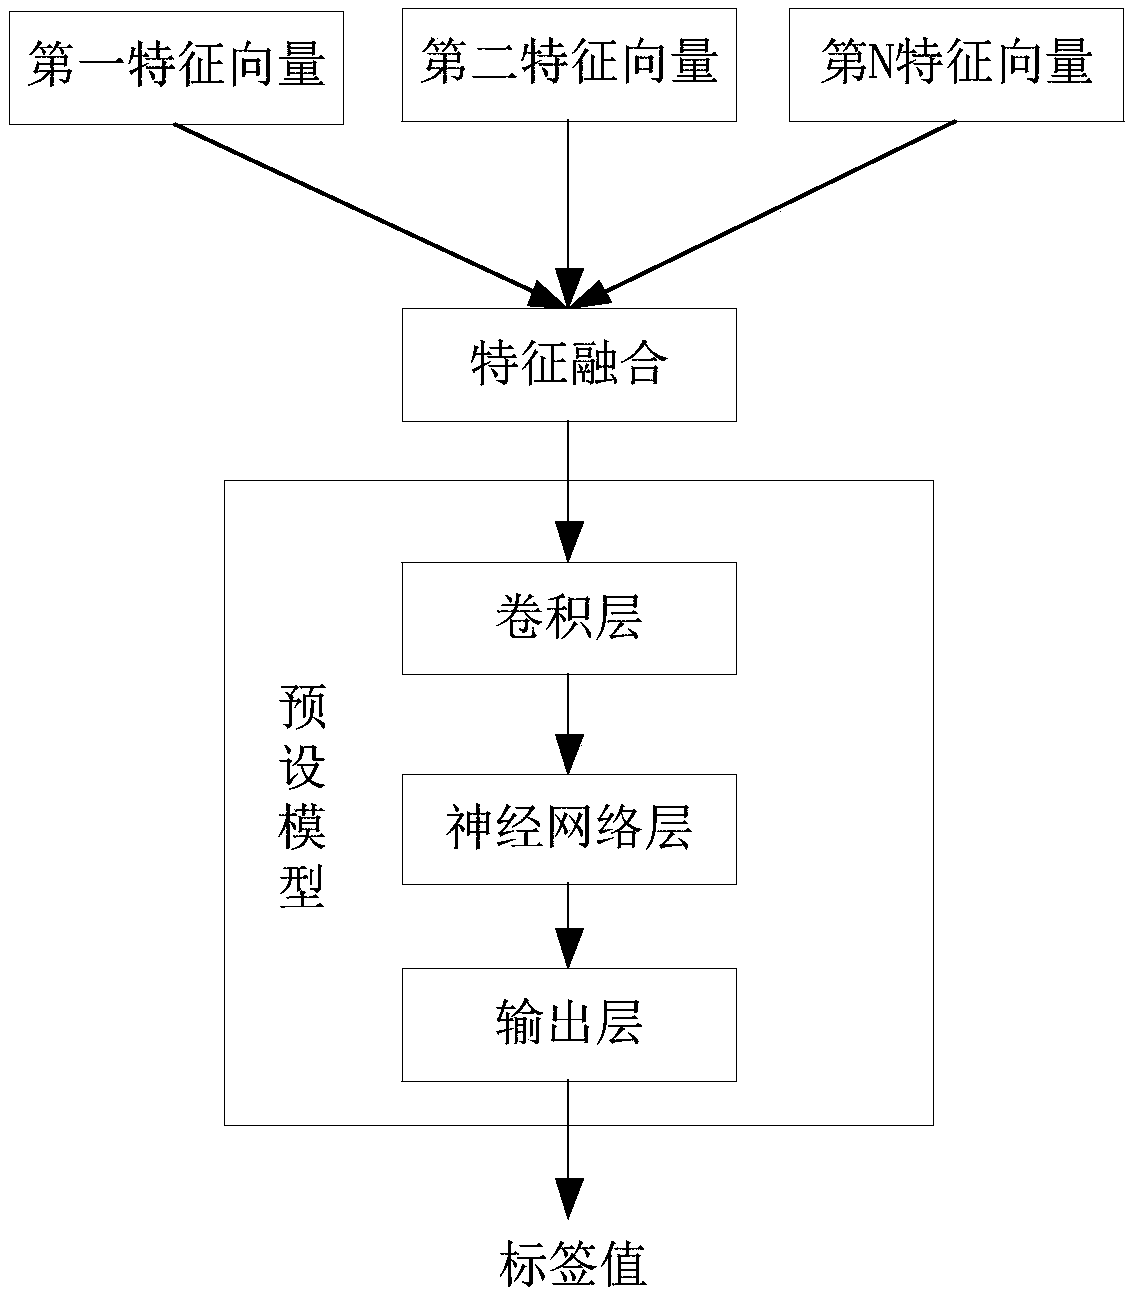 Sound processing method, device and equipment